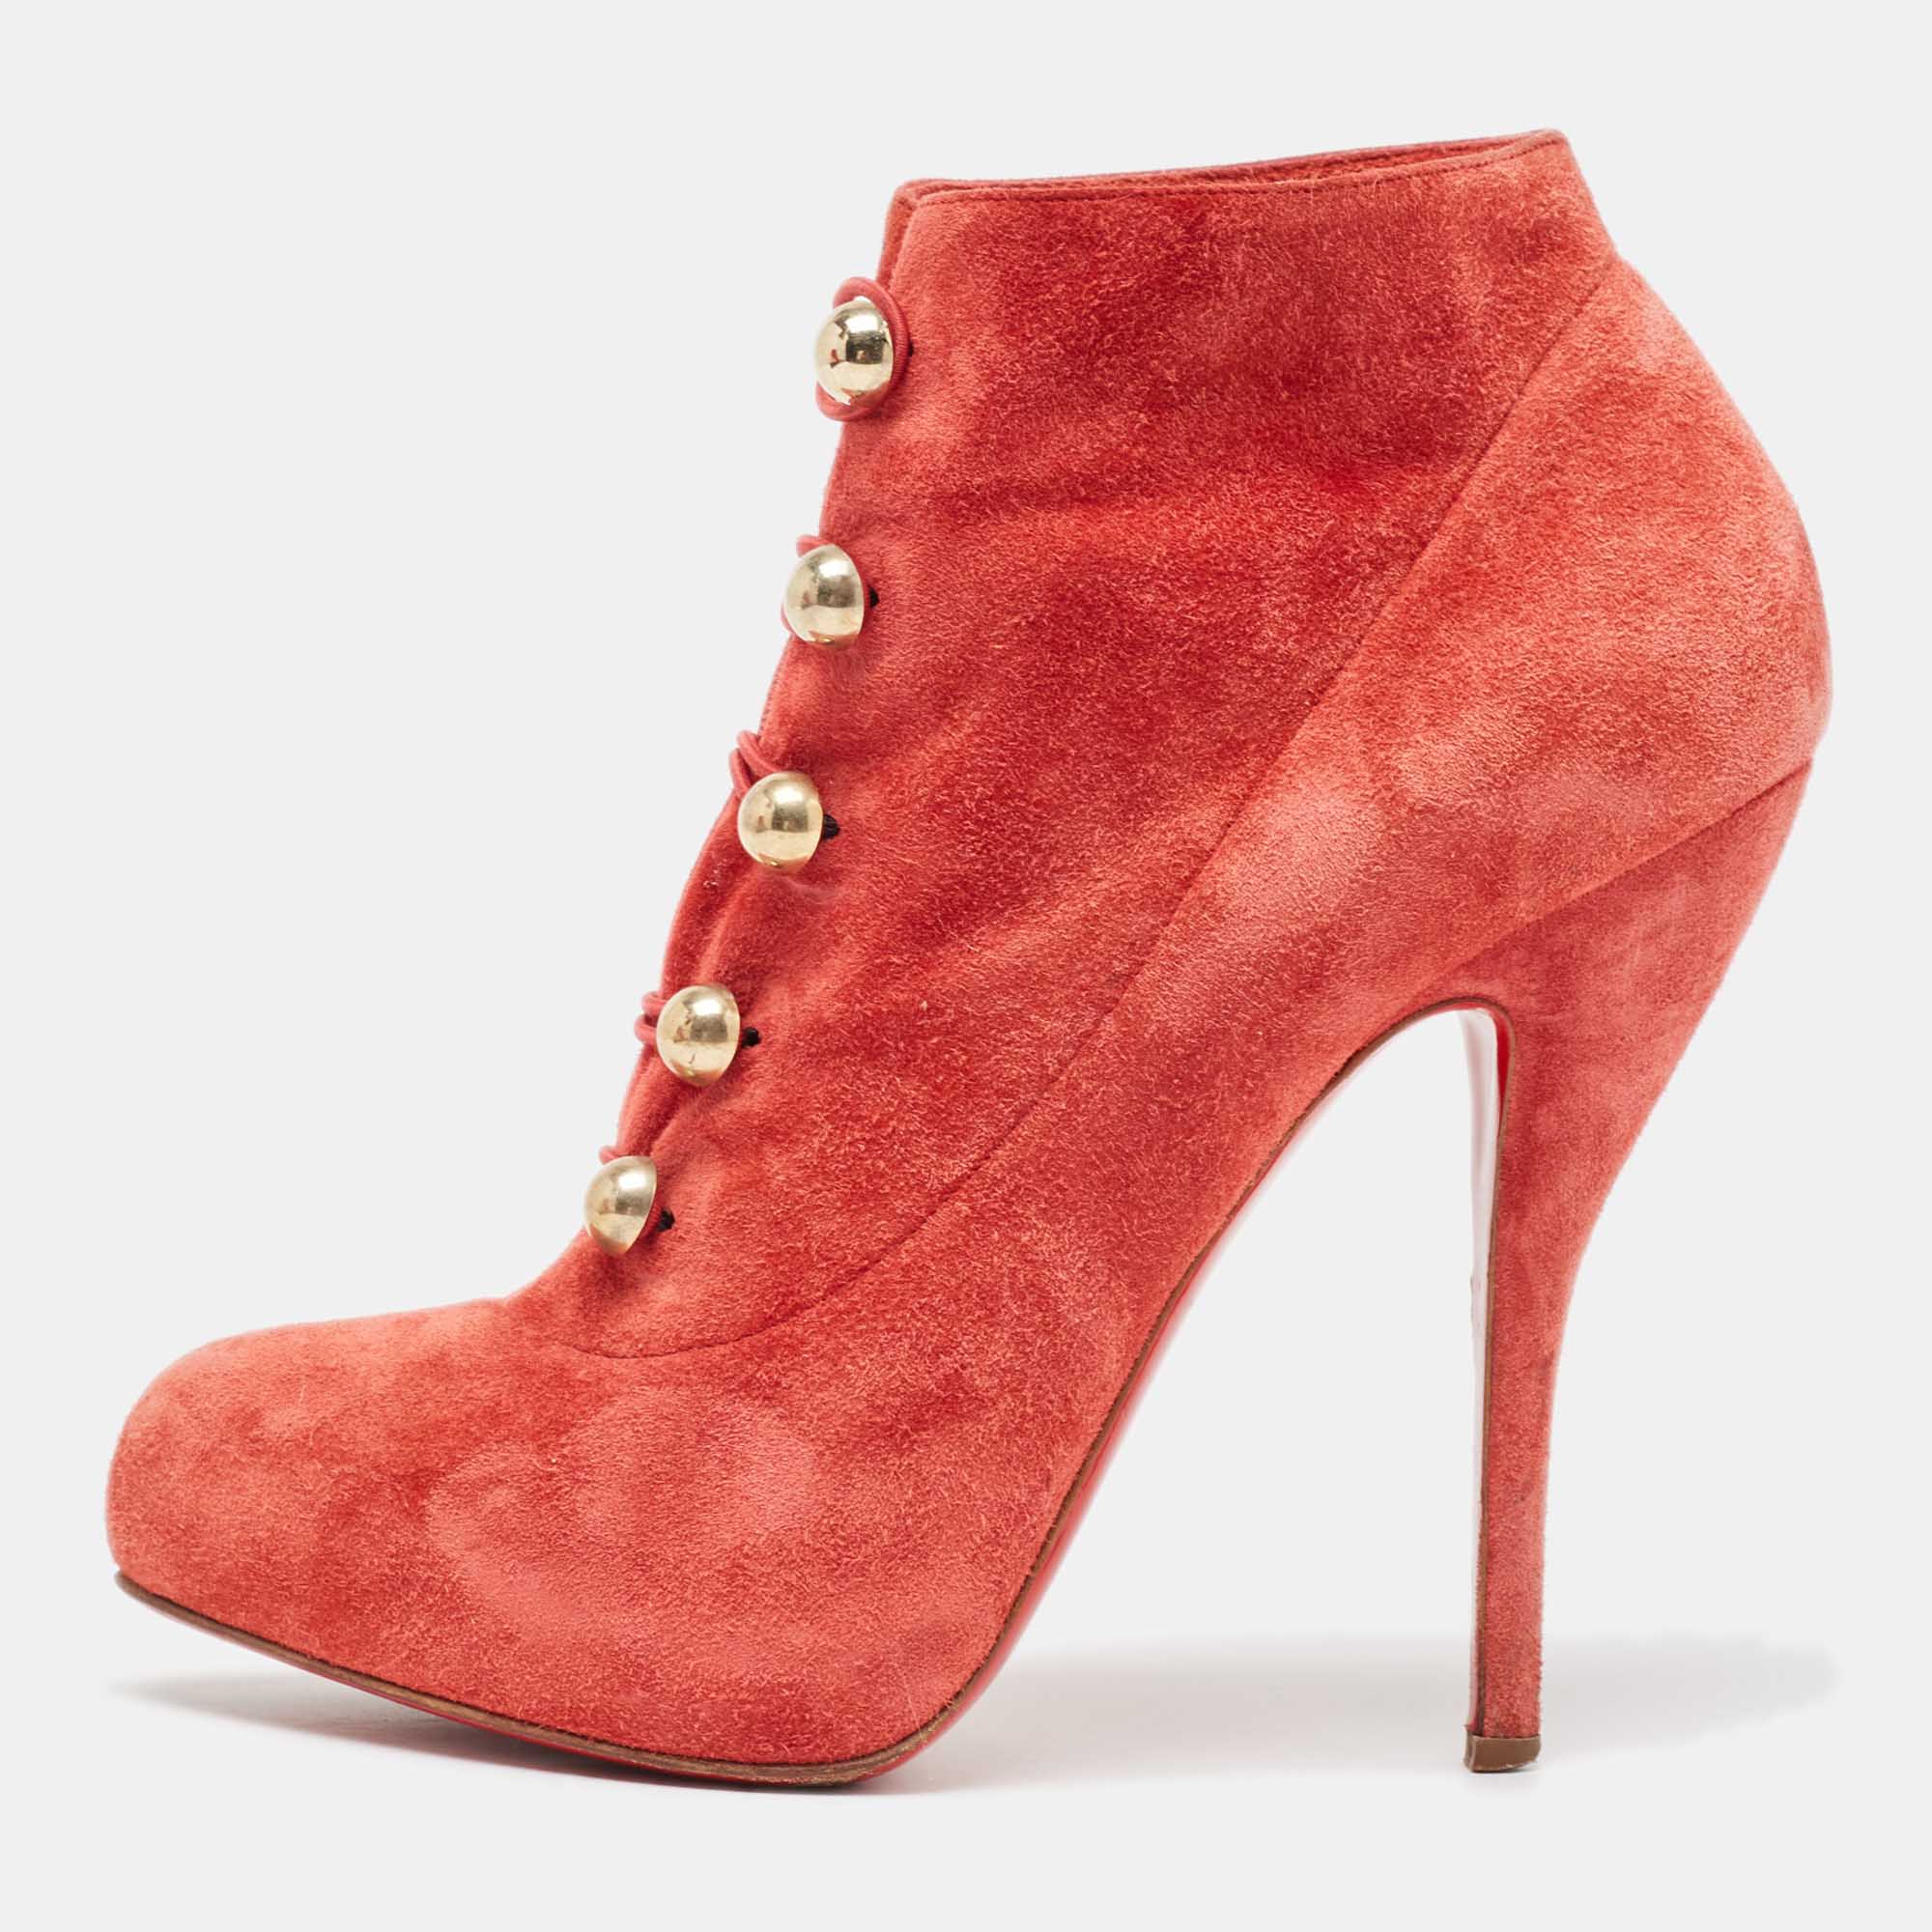 Christian louboutin red suede booties size 39.5